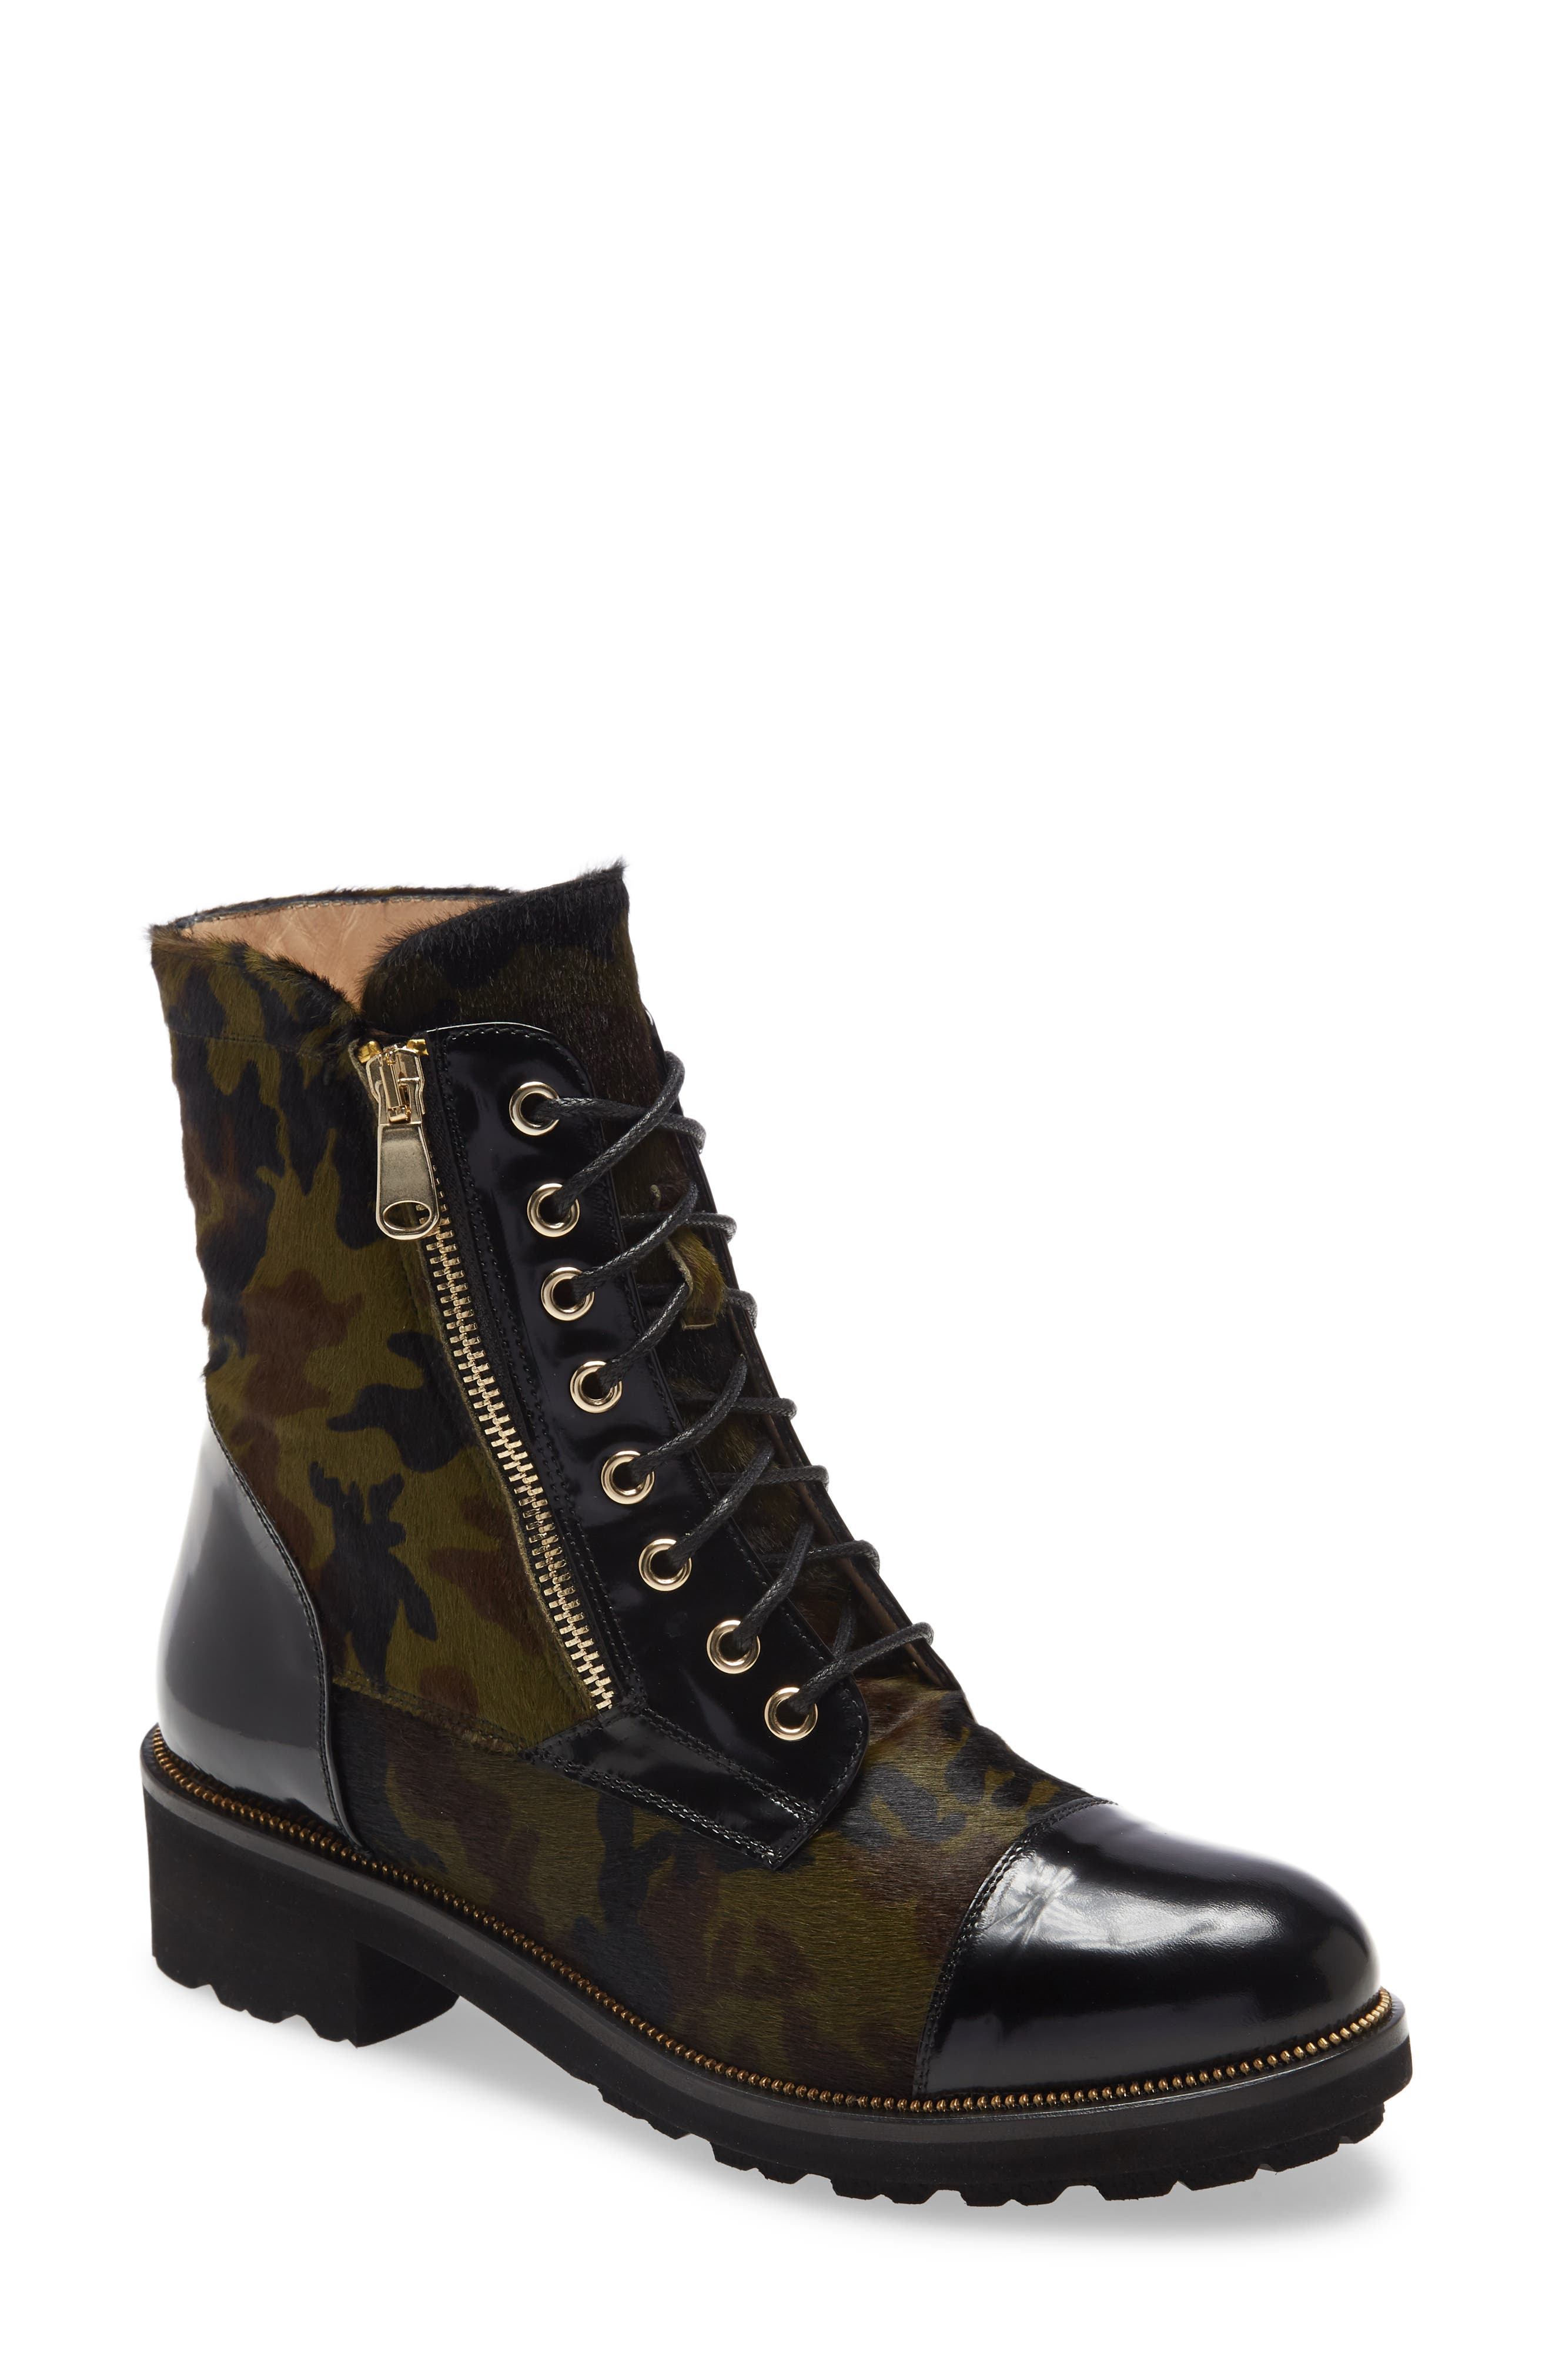 Ron White Tiffany Water Resistant Combat Boot In Onyx Camo